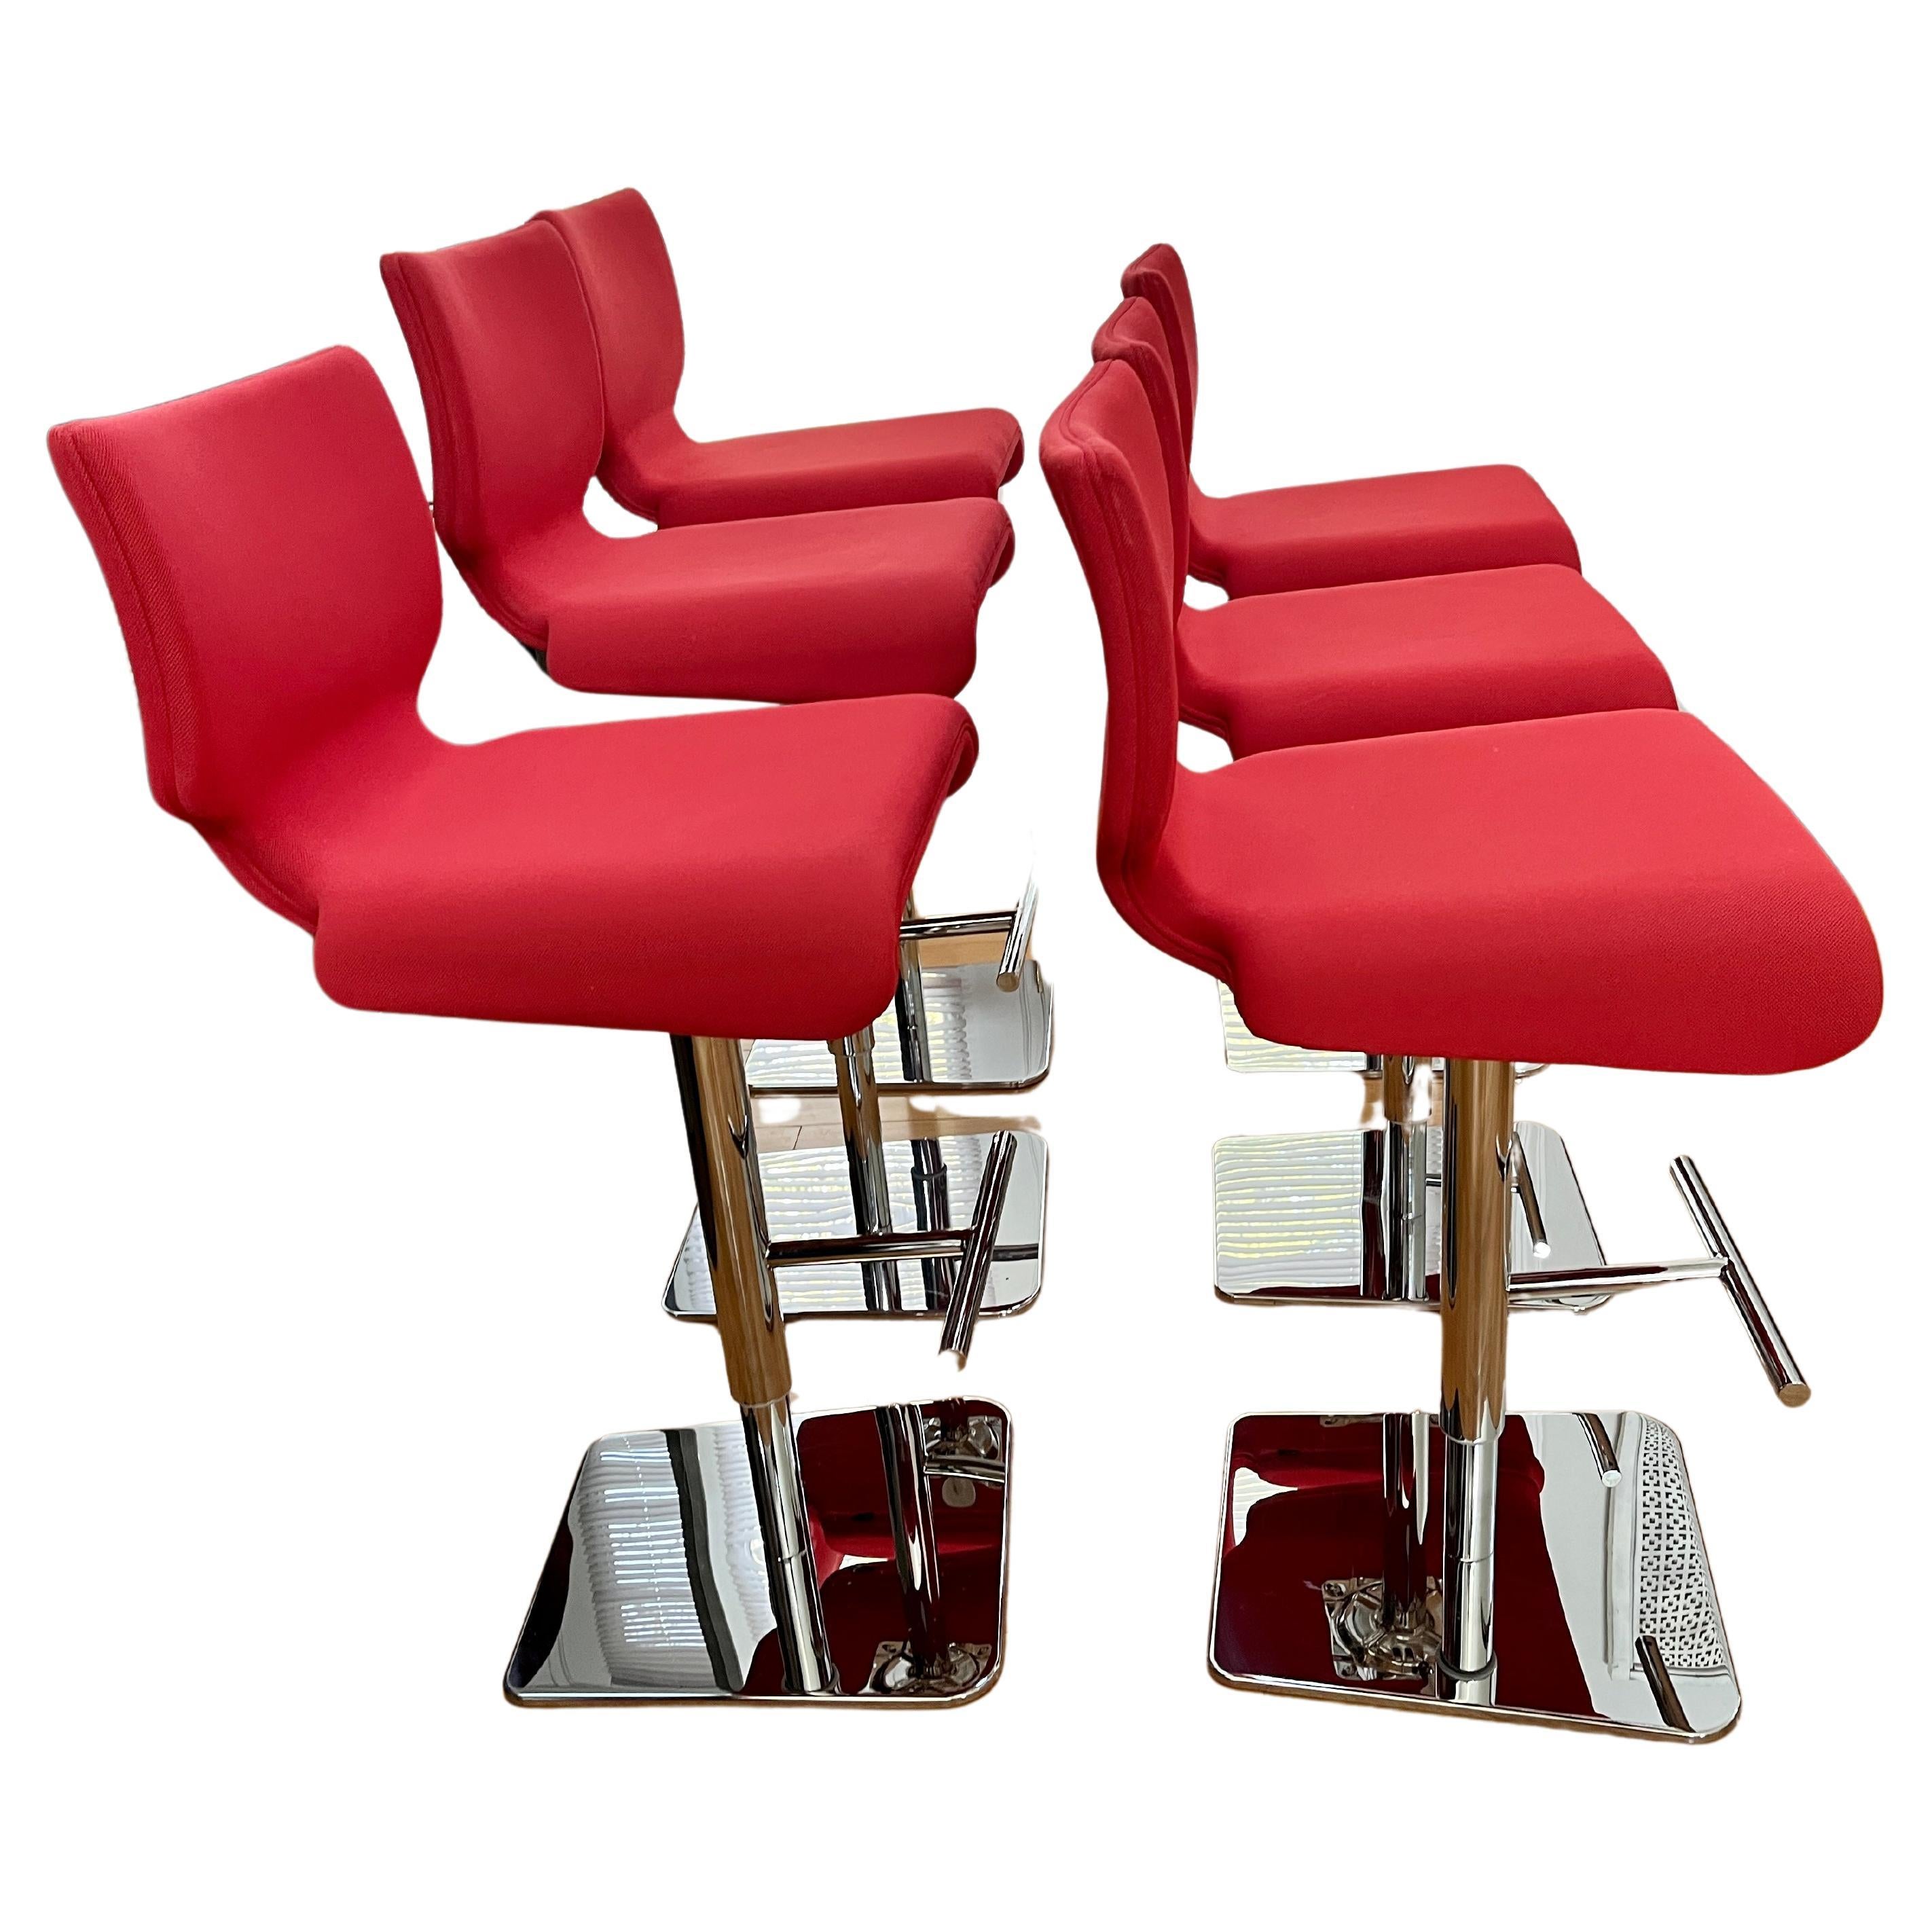 Roche Bobois Chabada Stool, Swivel, Footrest, Chrome Plated - 6 Available In Good Condition For Sale In Southampton, NJ